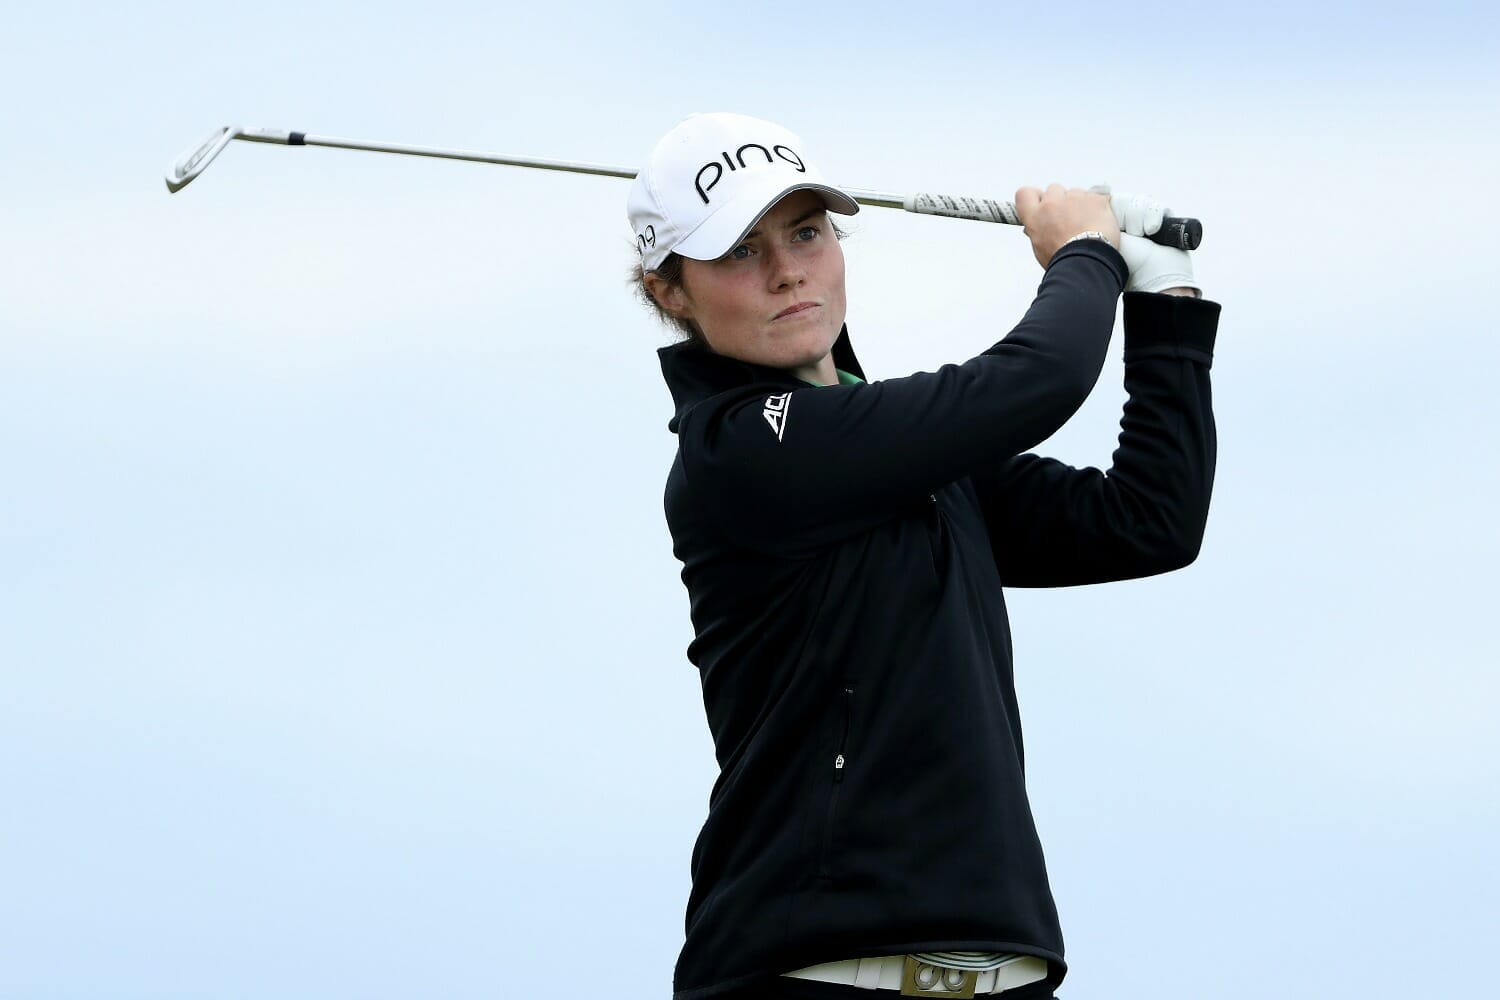 Maguire gets a solid start at LPGA Q-School